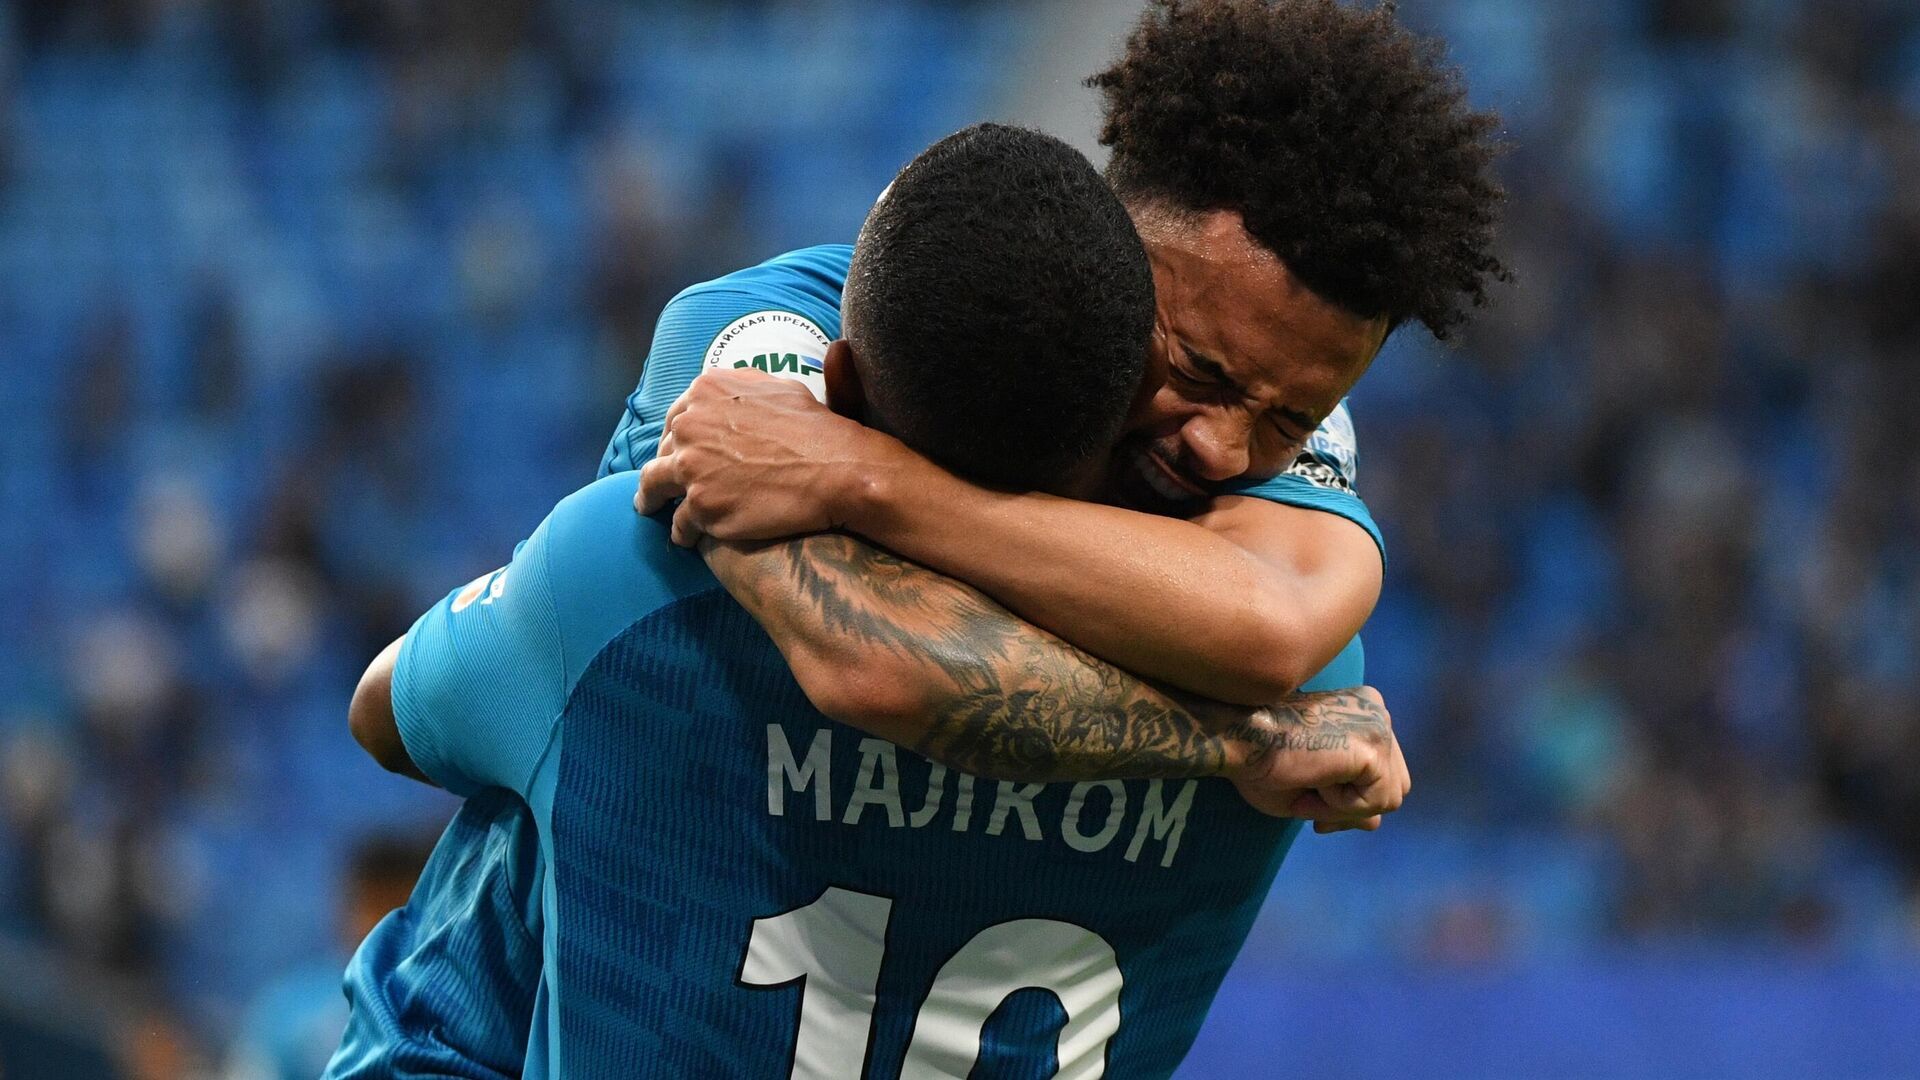 Agent: Malcom and Claudinho have a great chance to play at World Cup 2026, Brazilian national team keeps an eye on them